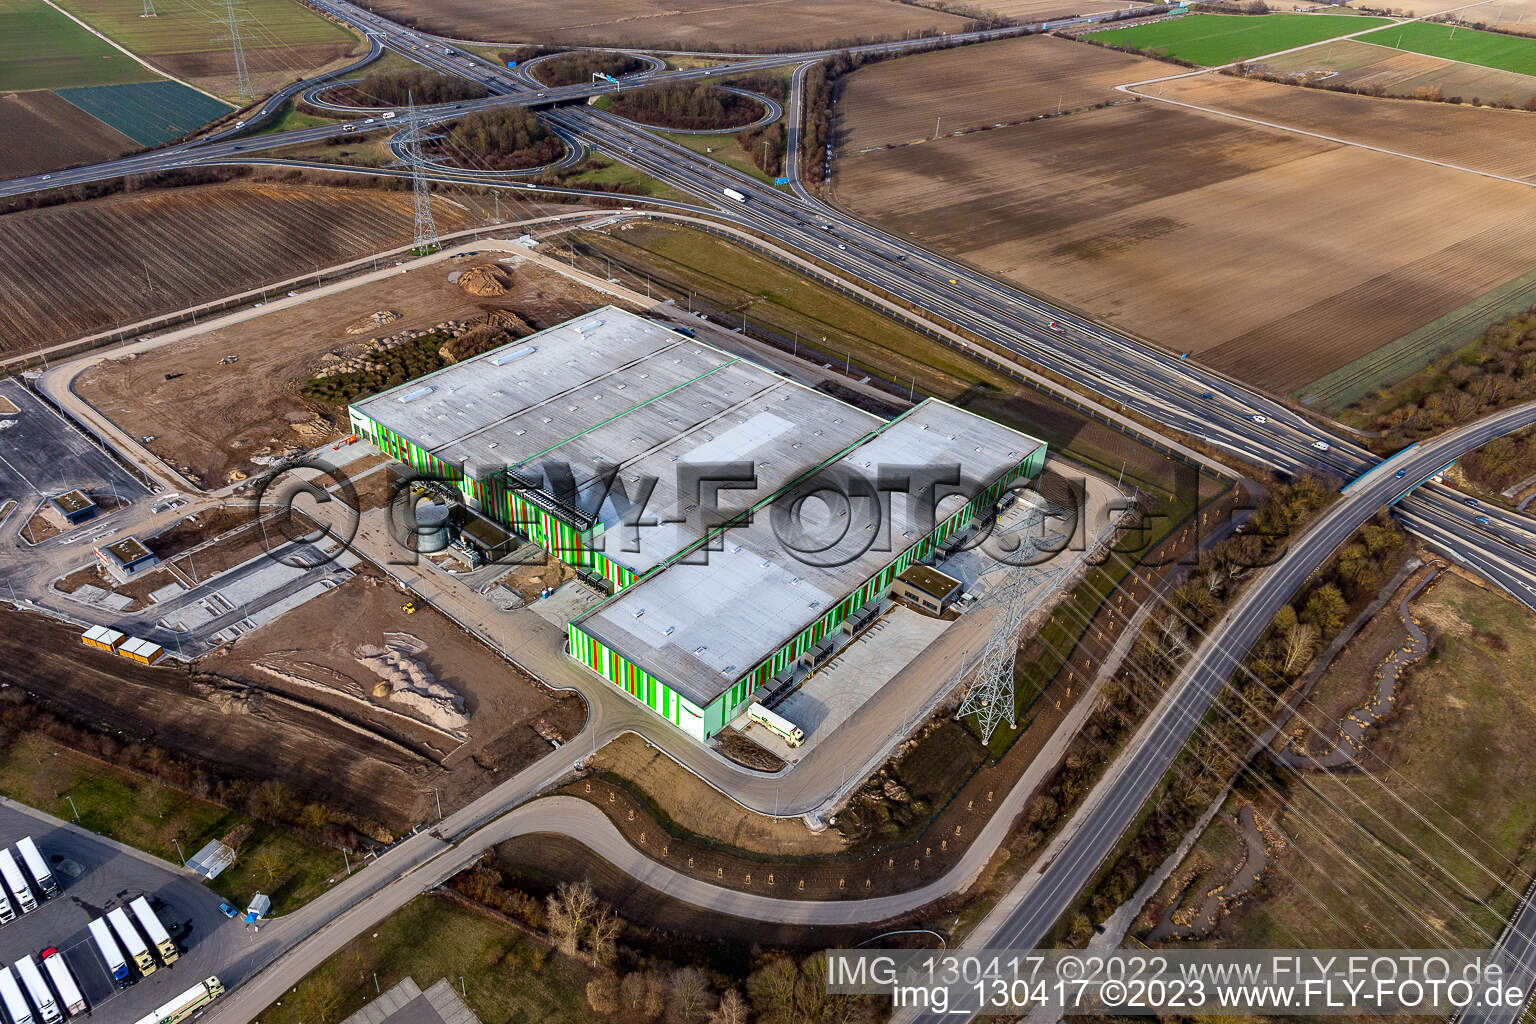 New construction of the Pfalzmarkt for fruit and vegetables in Mutterstadt in the state Rhineland-Palatinate, Germany from above